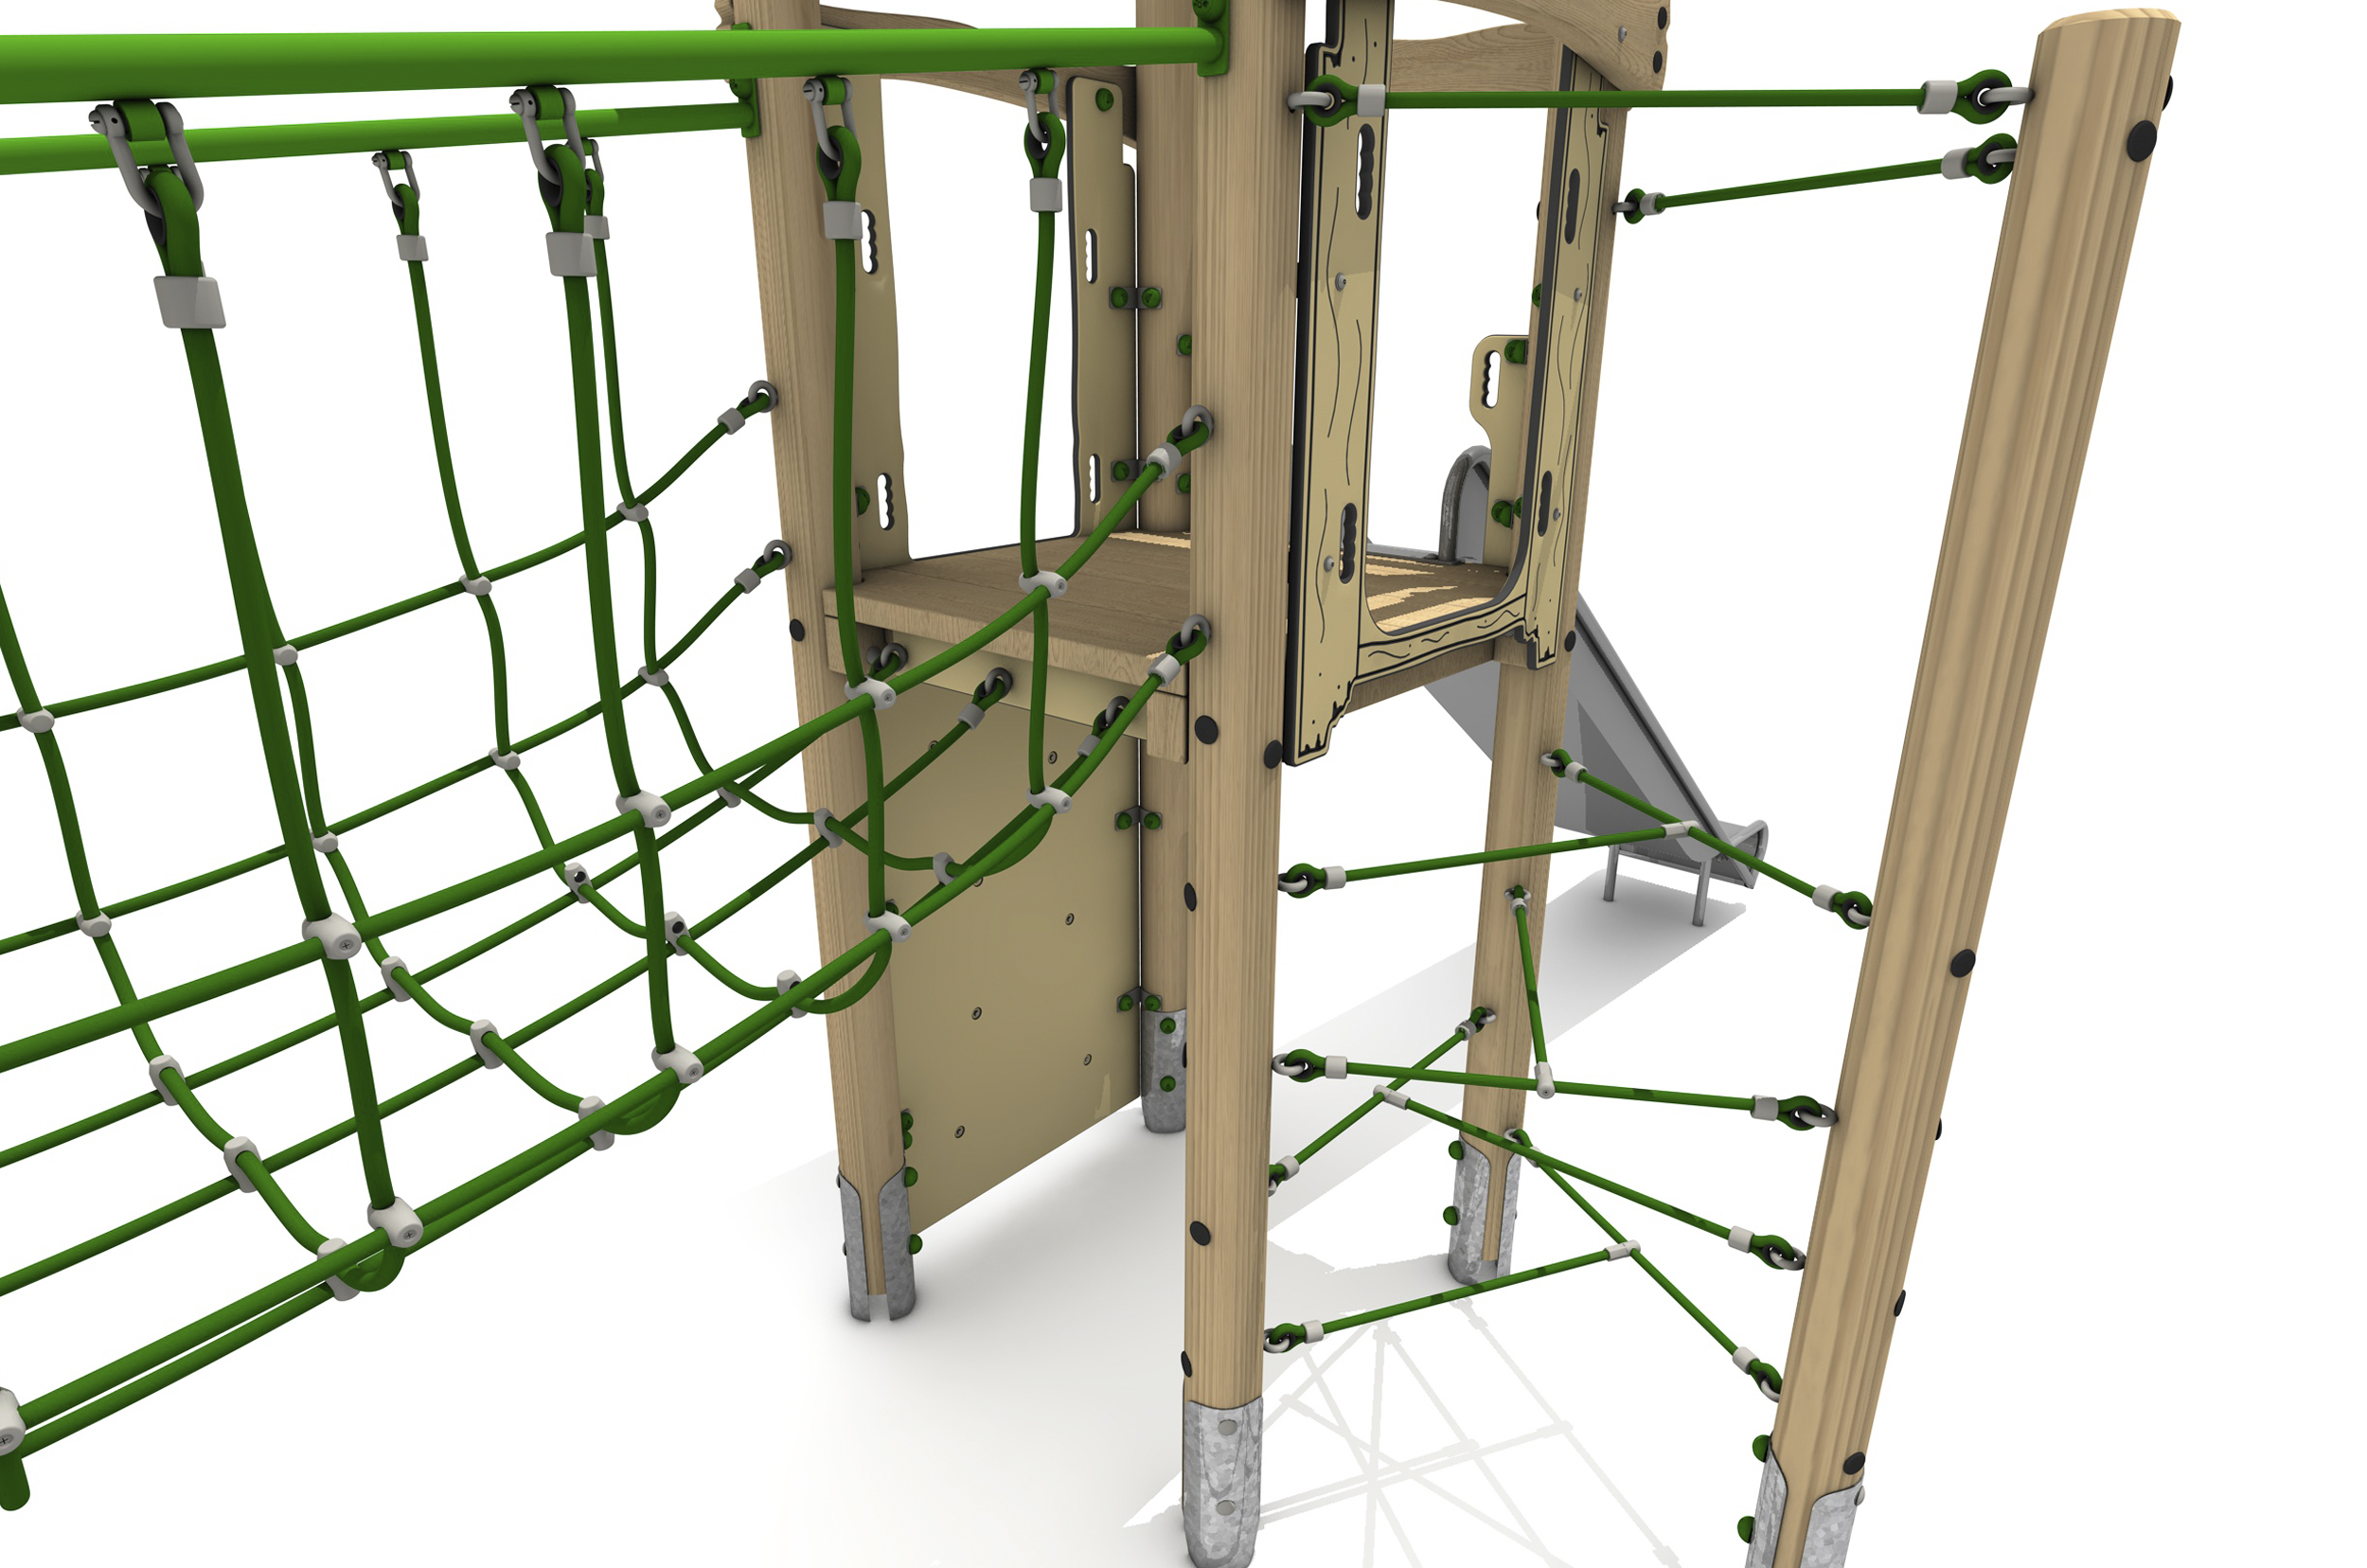 Timber Tower Double Deck 04, A timber tower with a green T-Rope climber on the right and a sloping green net bridge on the left. both lead to a platform where the slide is accessed.